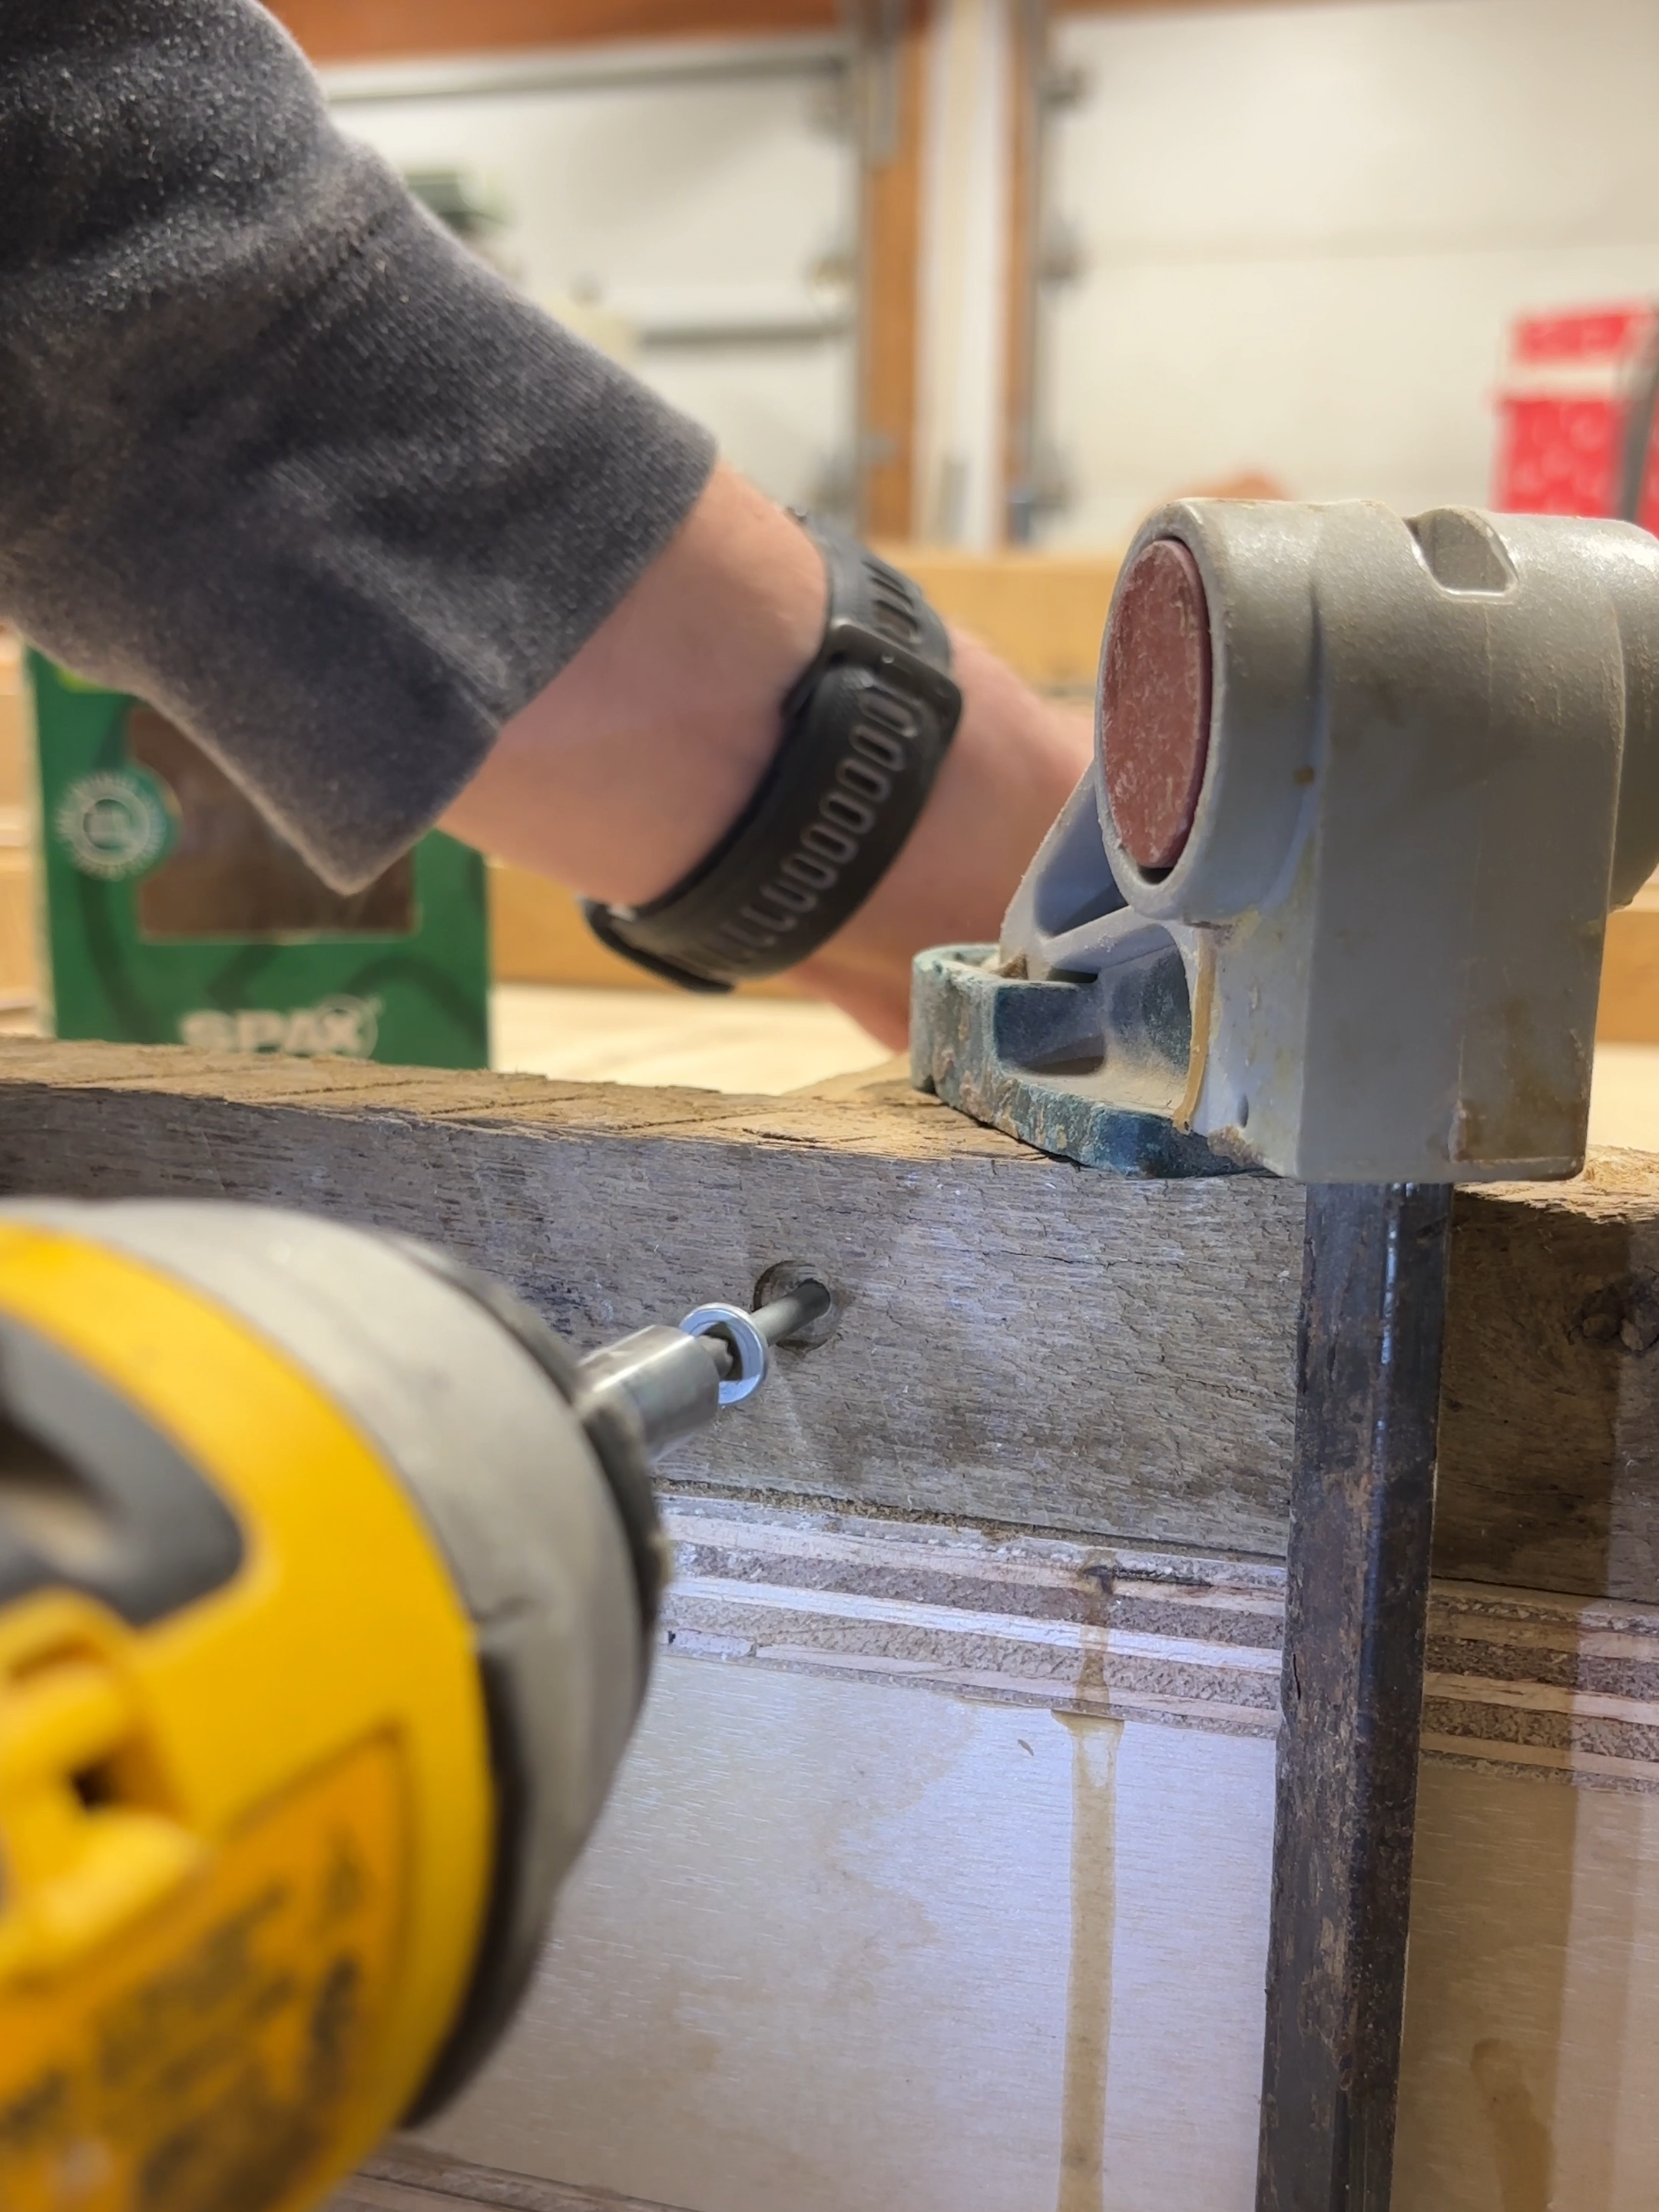 Meet @joshuahtaylorwoodworks, a talented, self-taught woodworker and D1 cross country athlete at @universityoftoledo! 🚀 “SPAX products have been instrumental in bringing my creative visions to life.” 🙌 Stay tuned for more from Joshuah! #SPAX #constructiontok #buildingtok #contractorlife #greenbox #SPAXcrew #woodworking #ladder